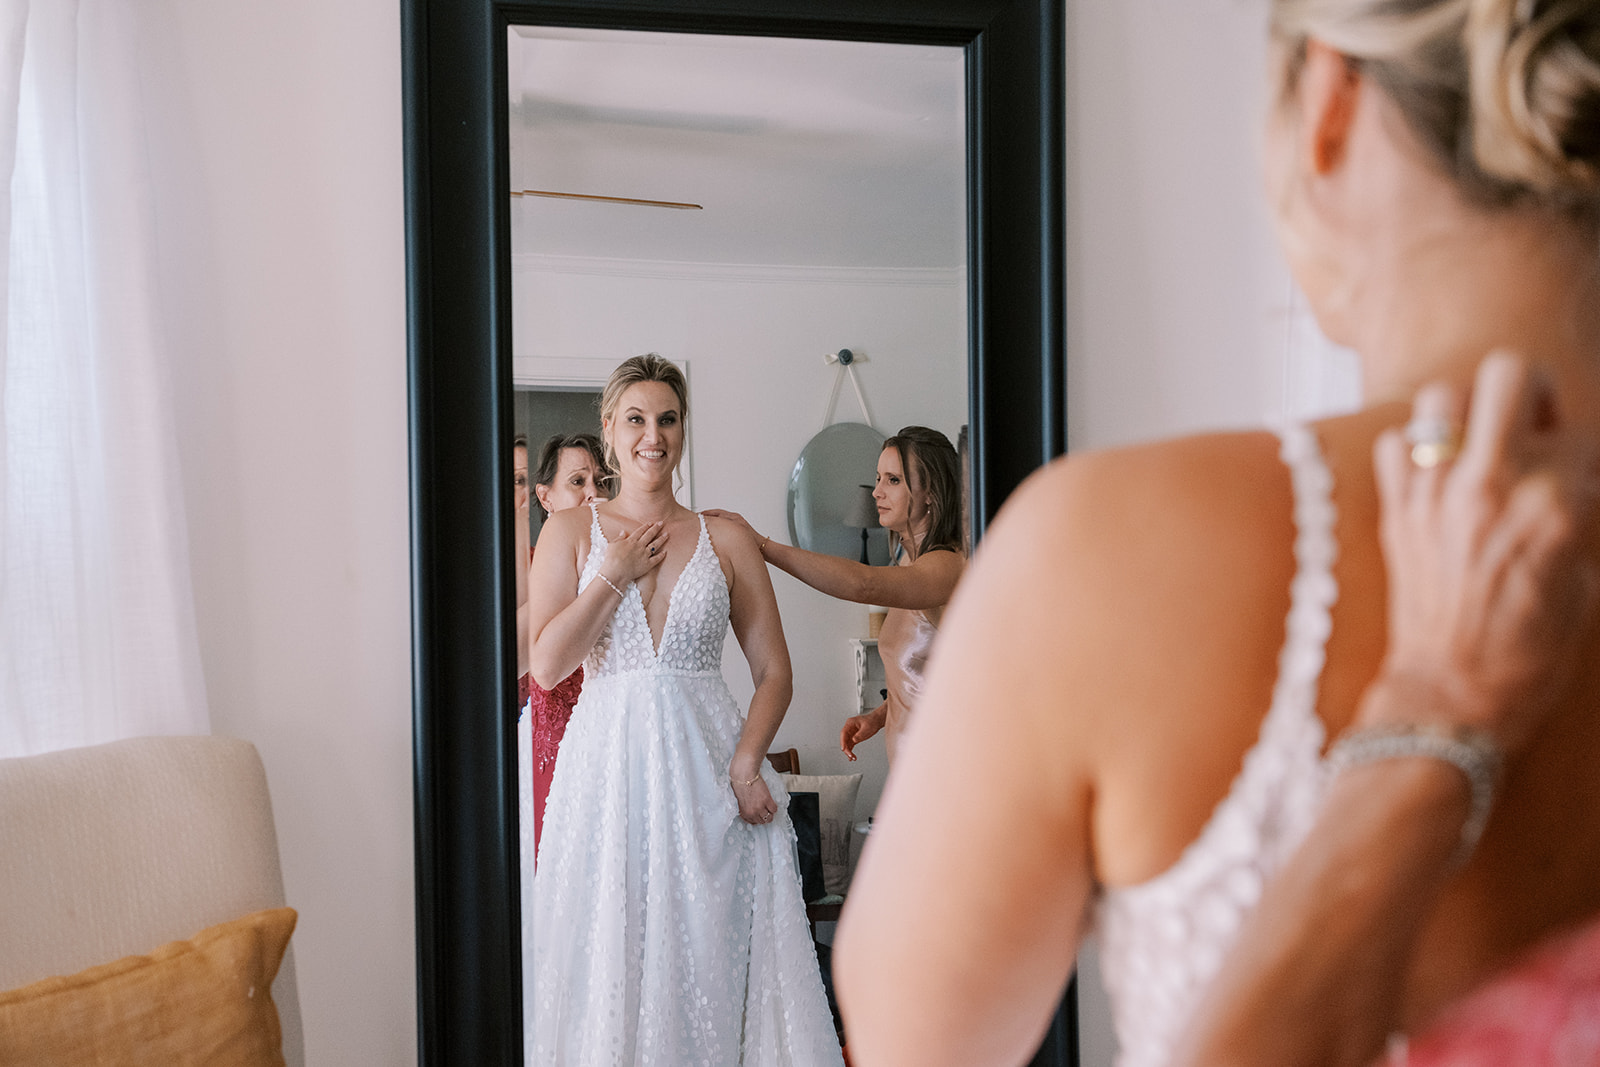 Bride looks at herself in the mirror as bridesmaids button up her dress